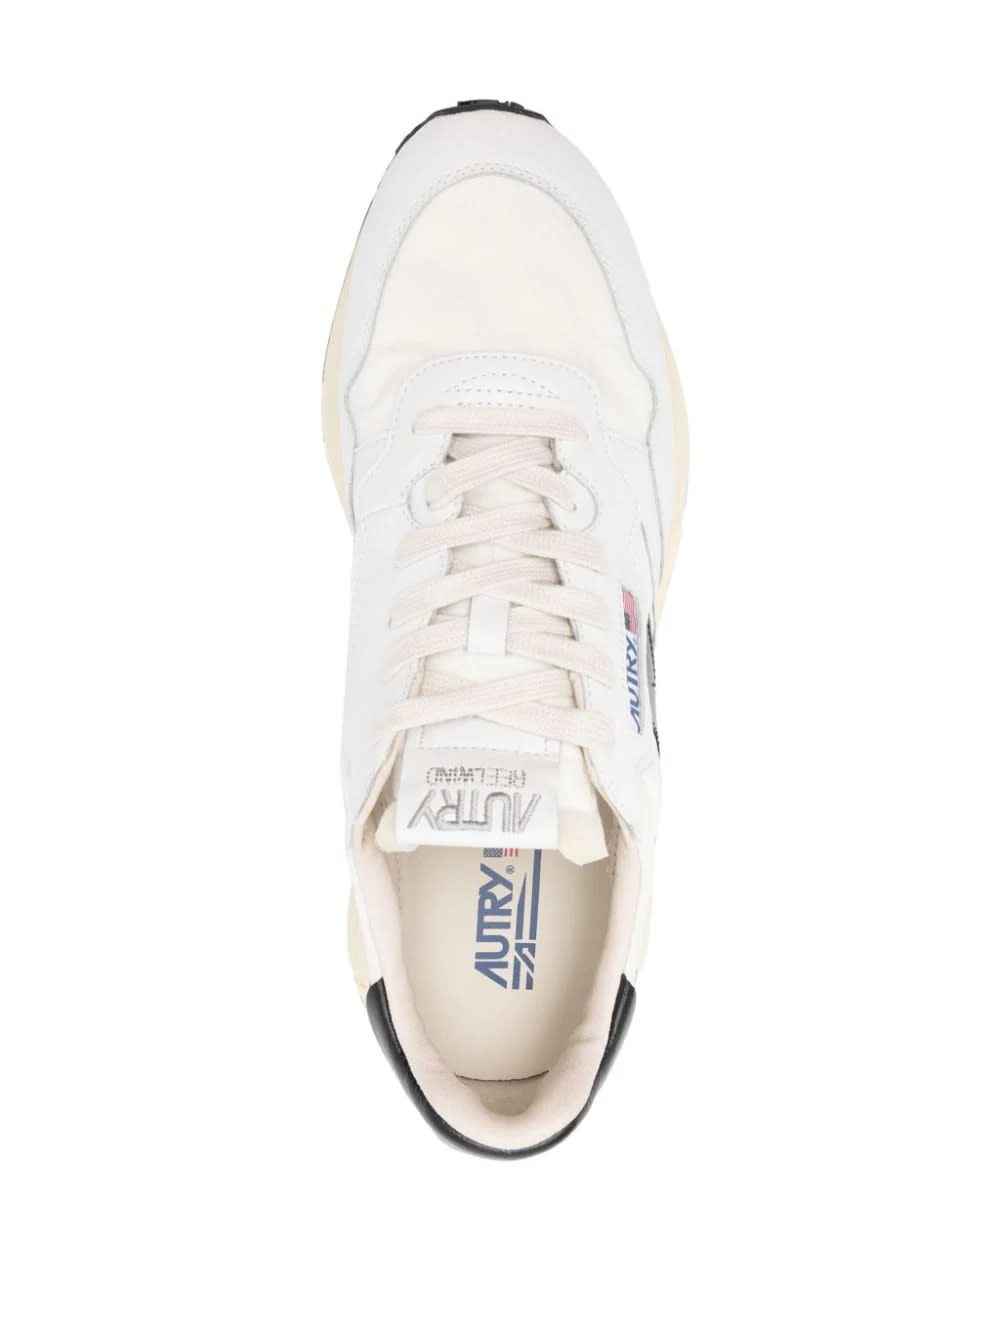 Shop Autry White And Black Reelwind Low Sneakers